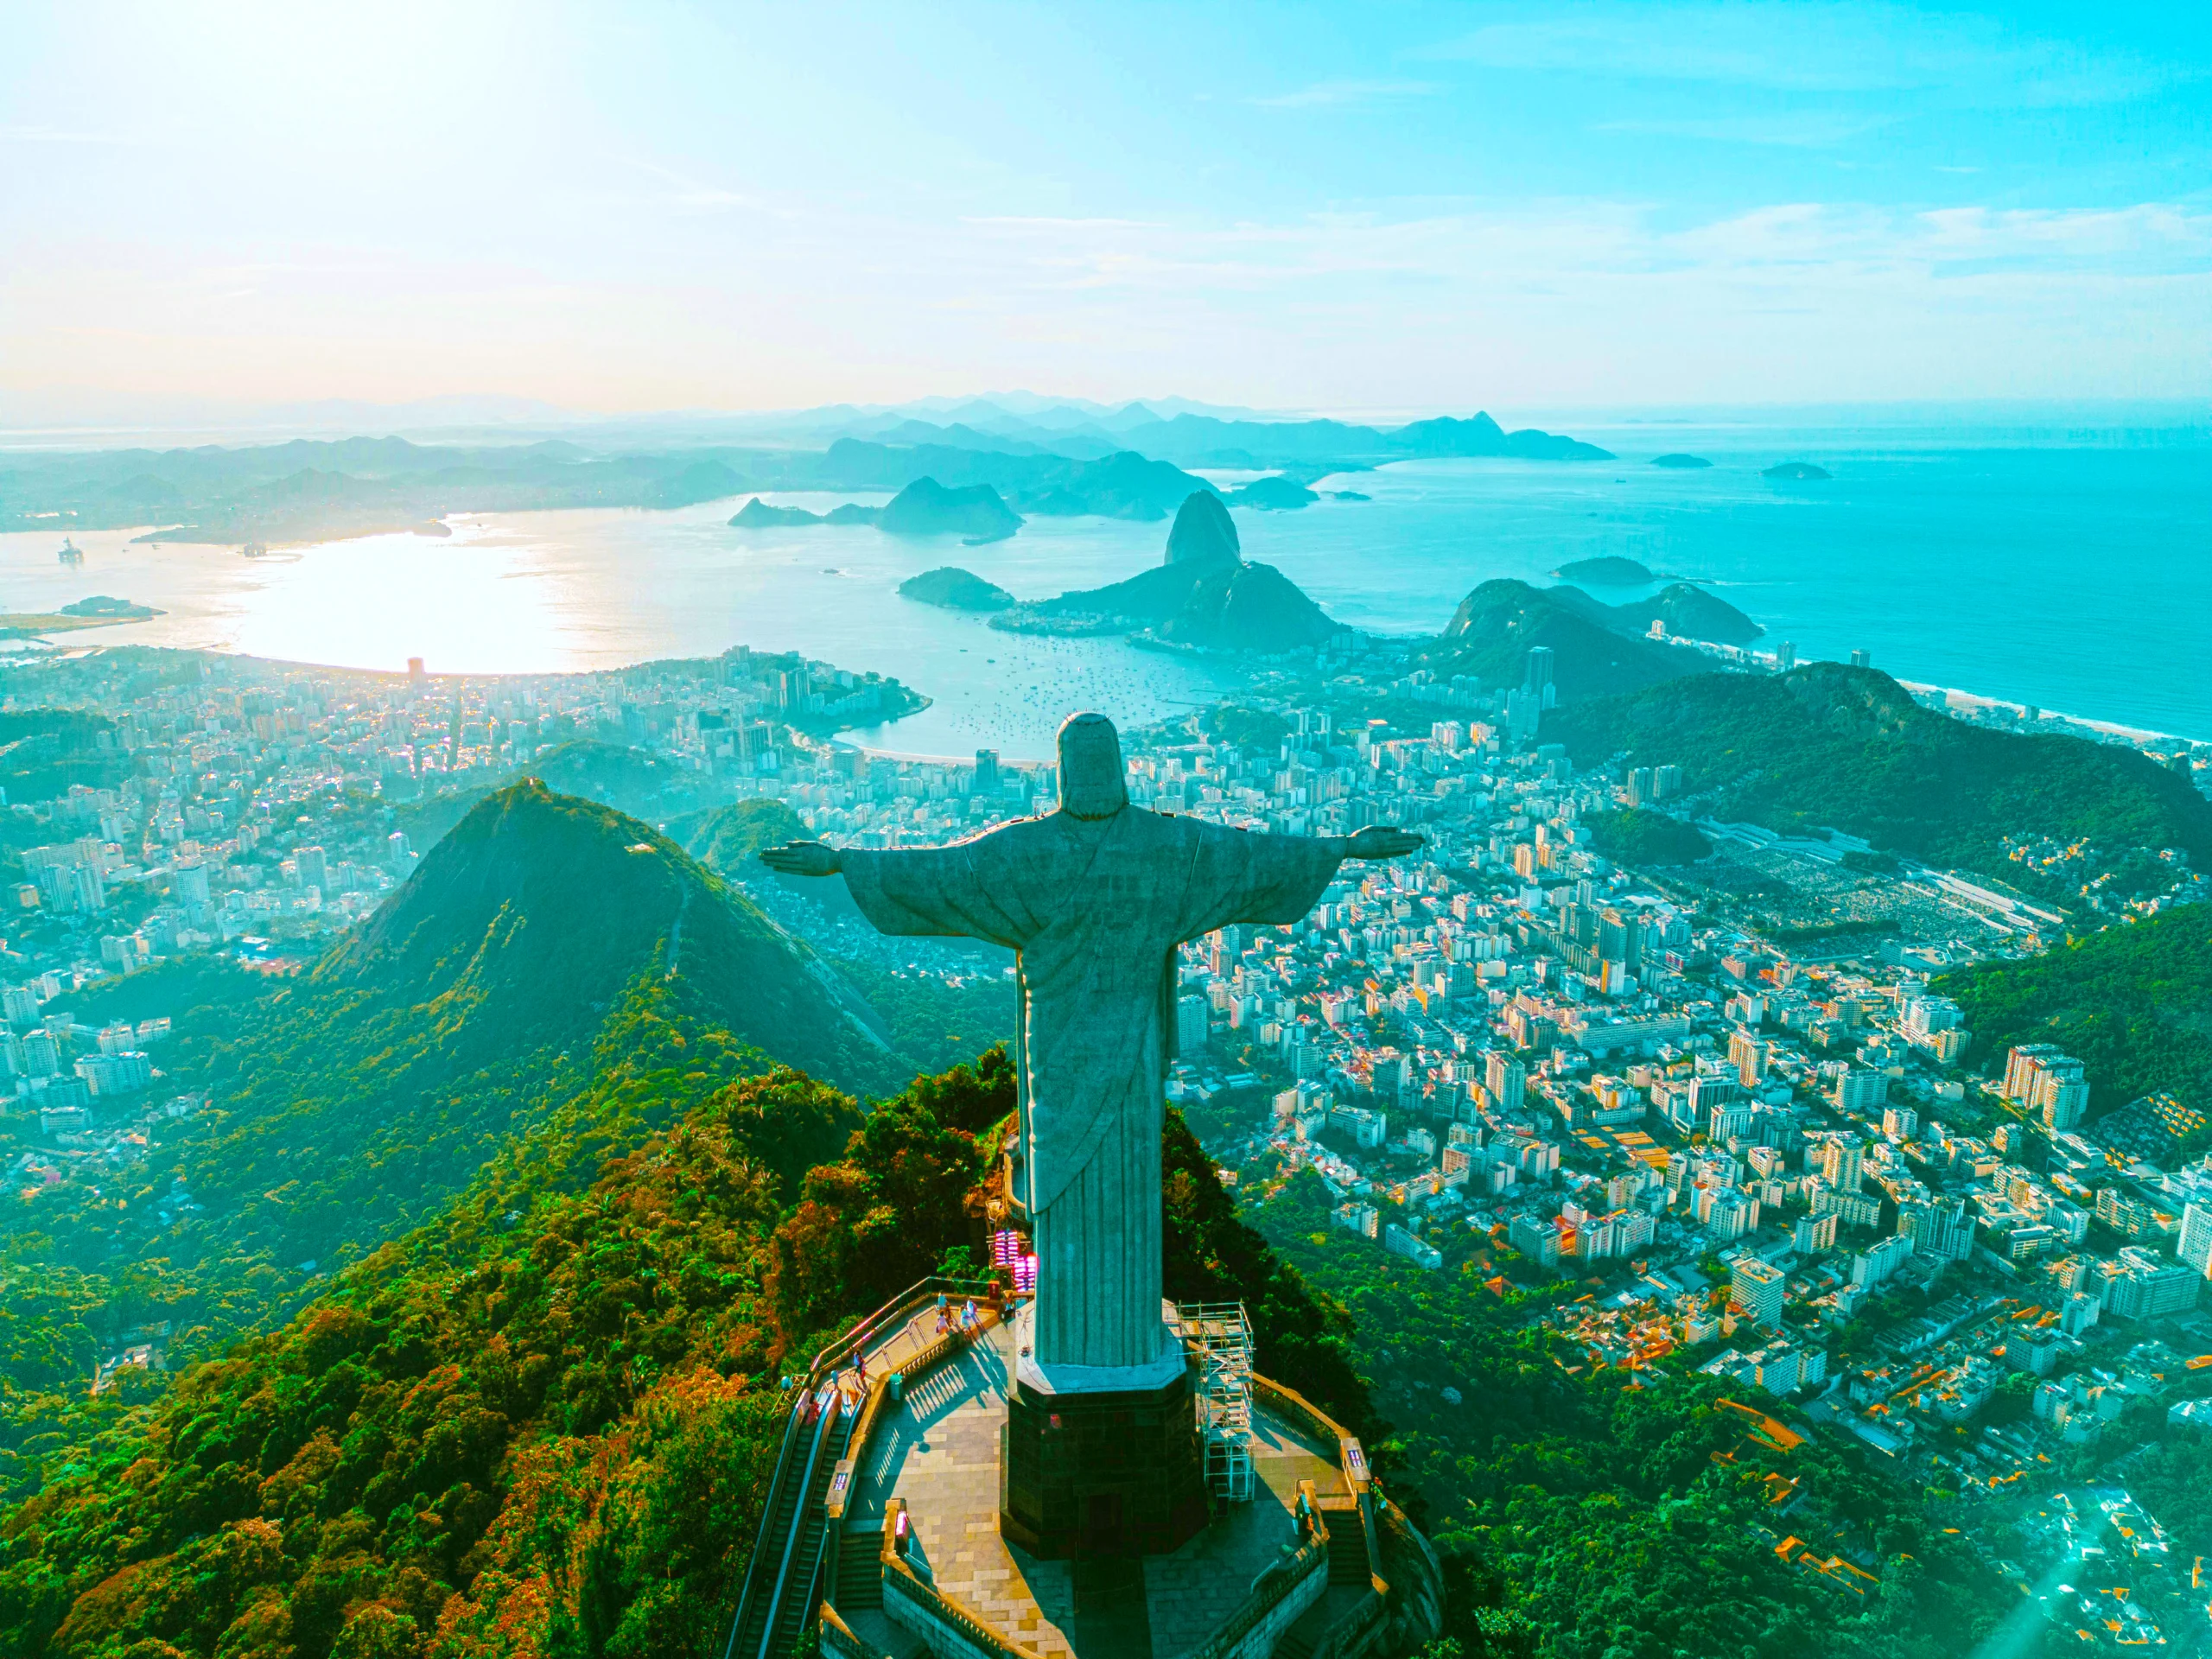 Warning Busting To See Amazing Rio de Janeiro!